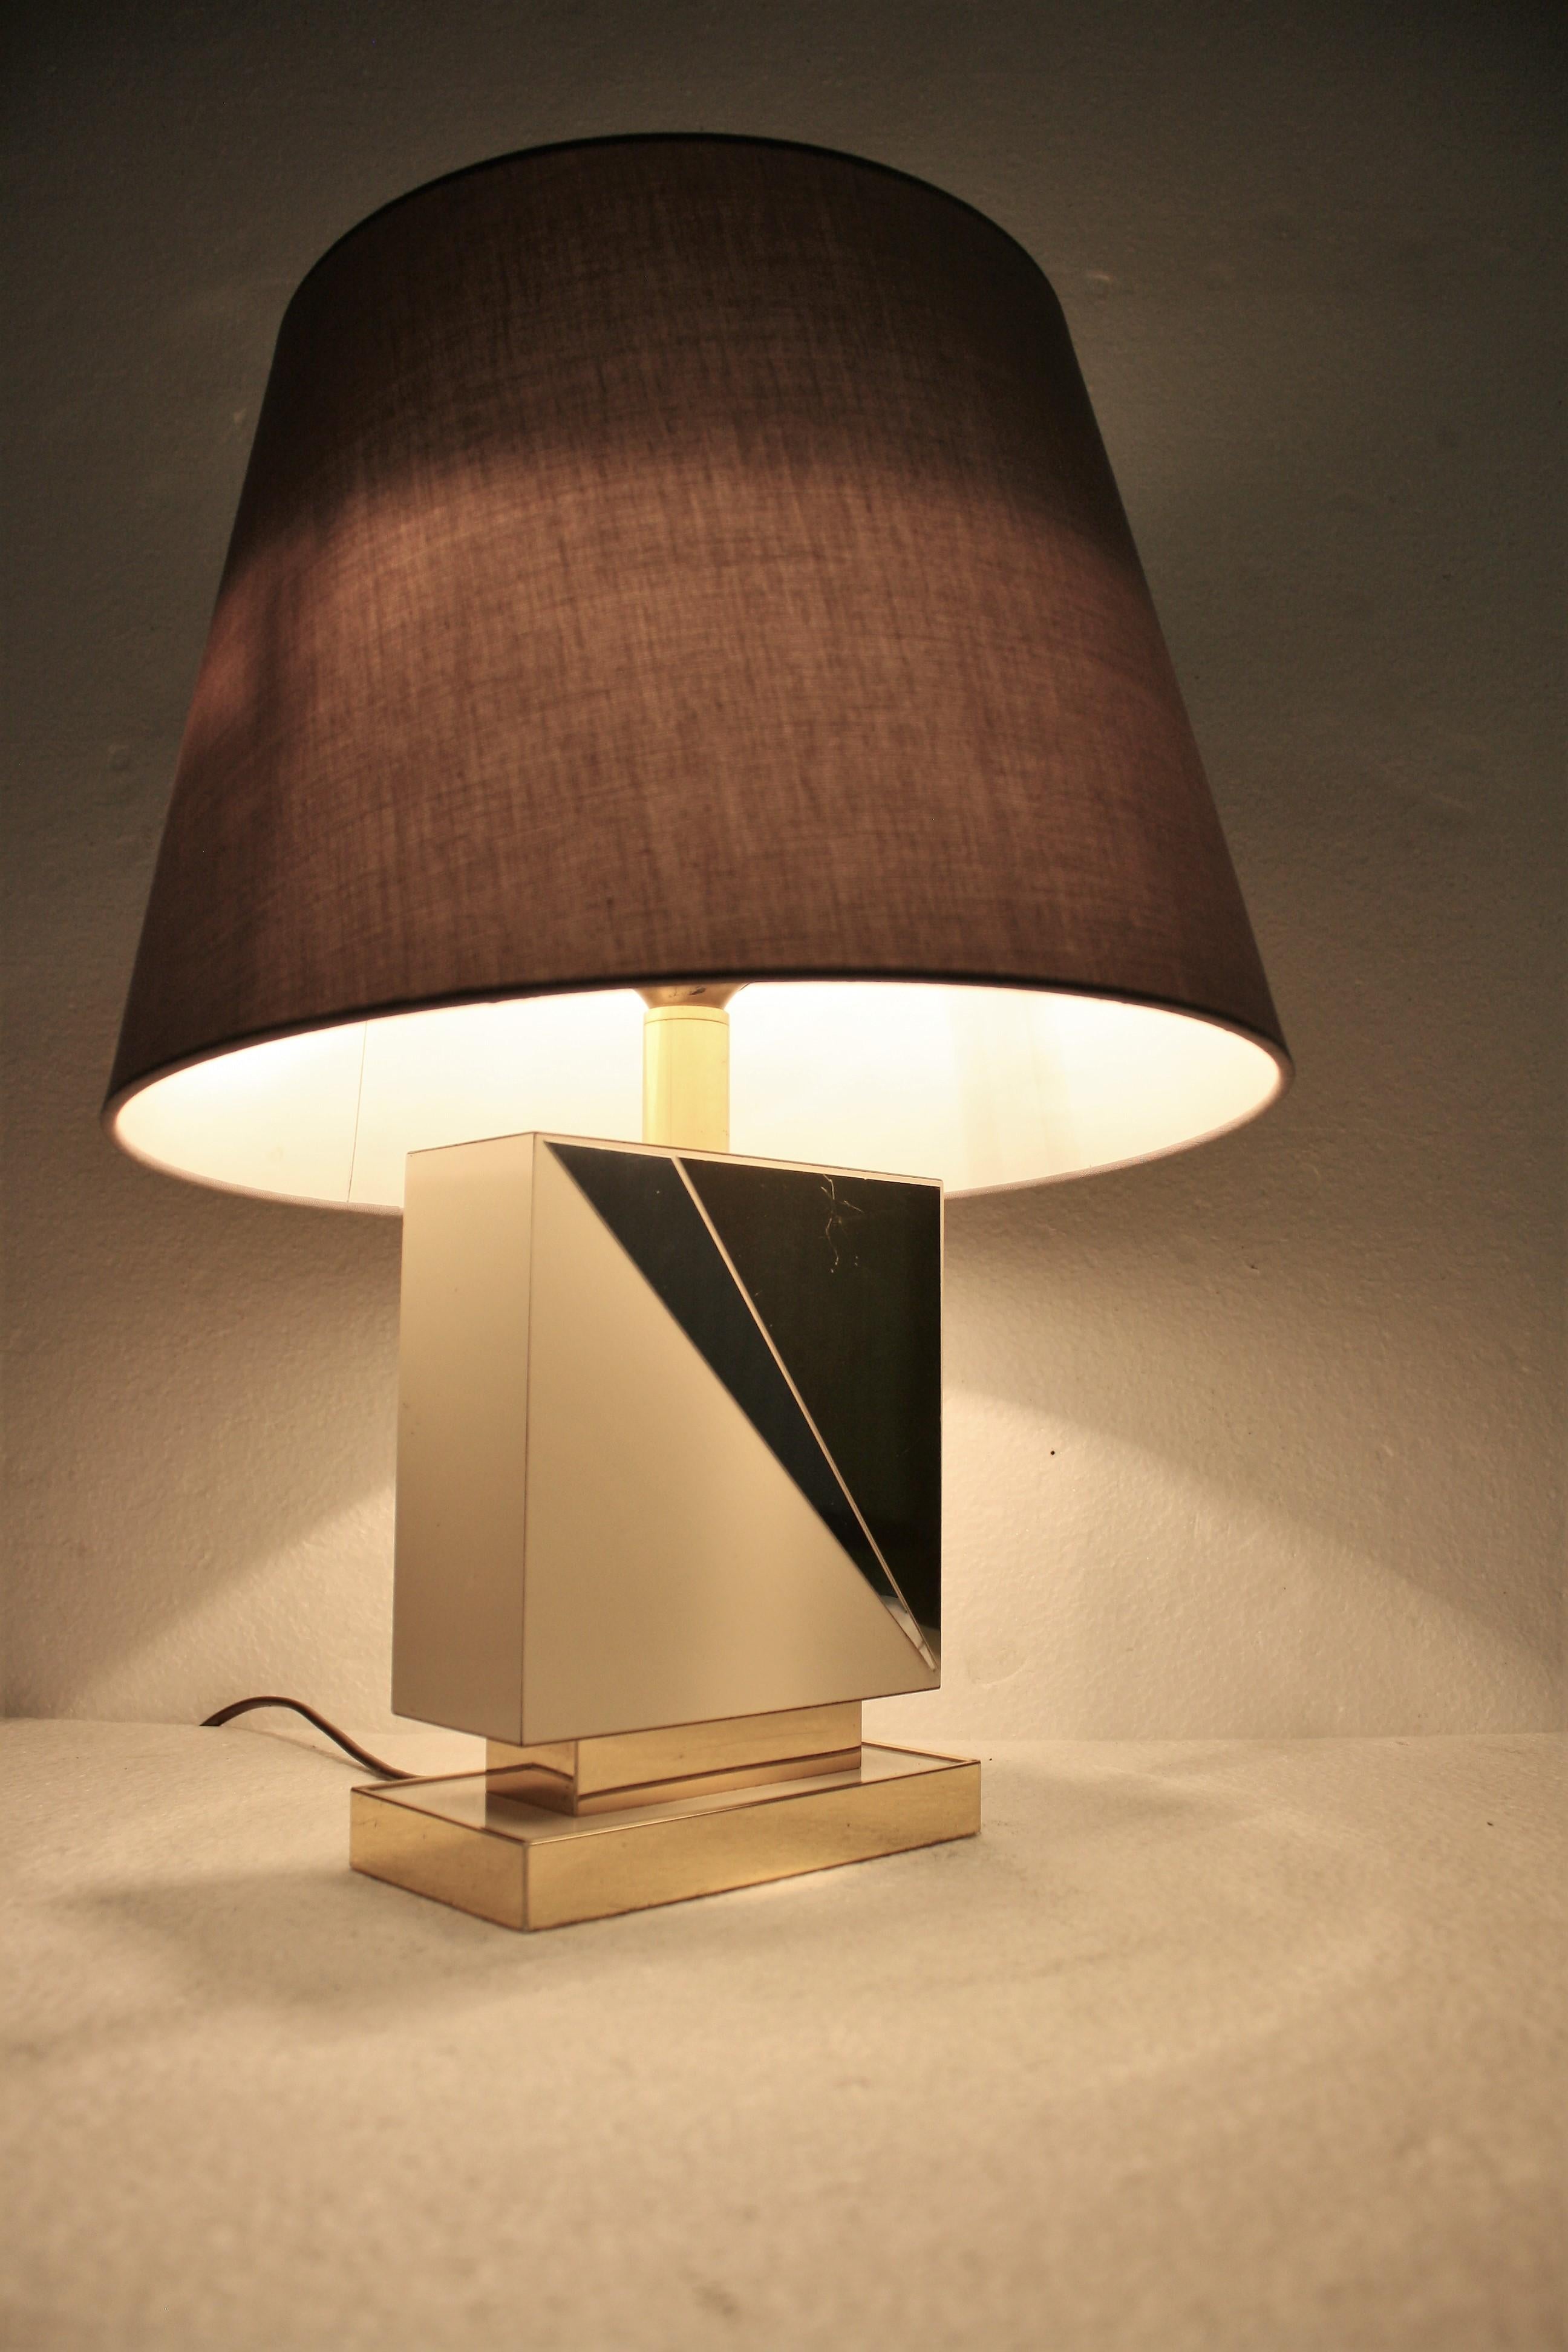 Regency style white lacquered table lamp on a brass base.

It features a brass and chrome decor.

Rewired, tested and ready for use. To be used with a regular E27 light bulb.

Good condition.

1970s, France

Dimensions:
Height: 44 cm/